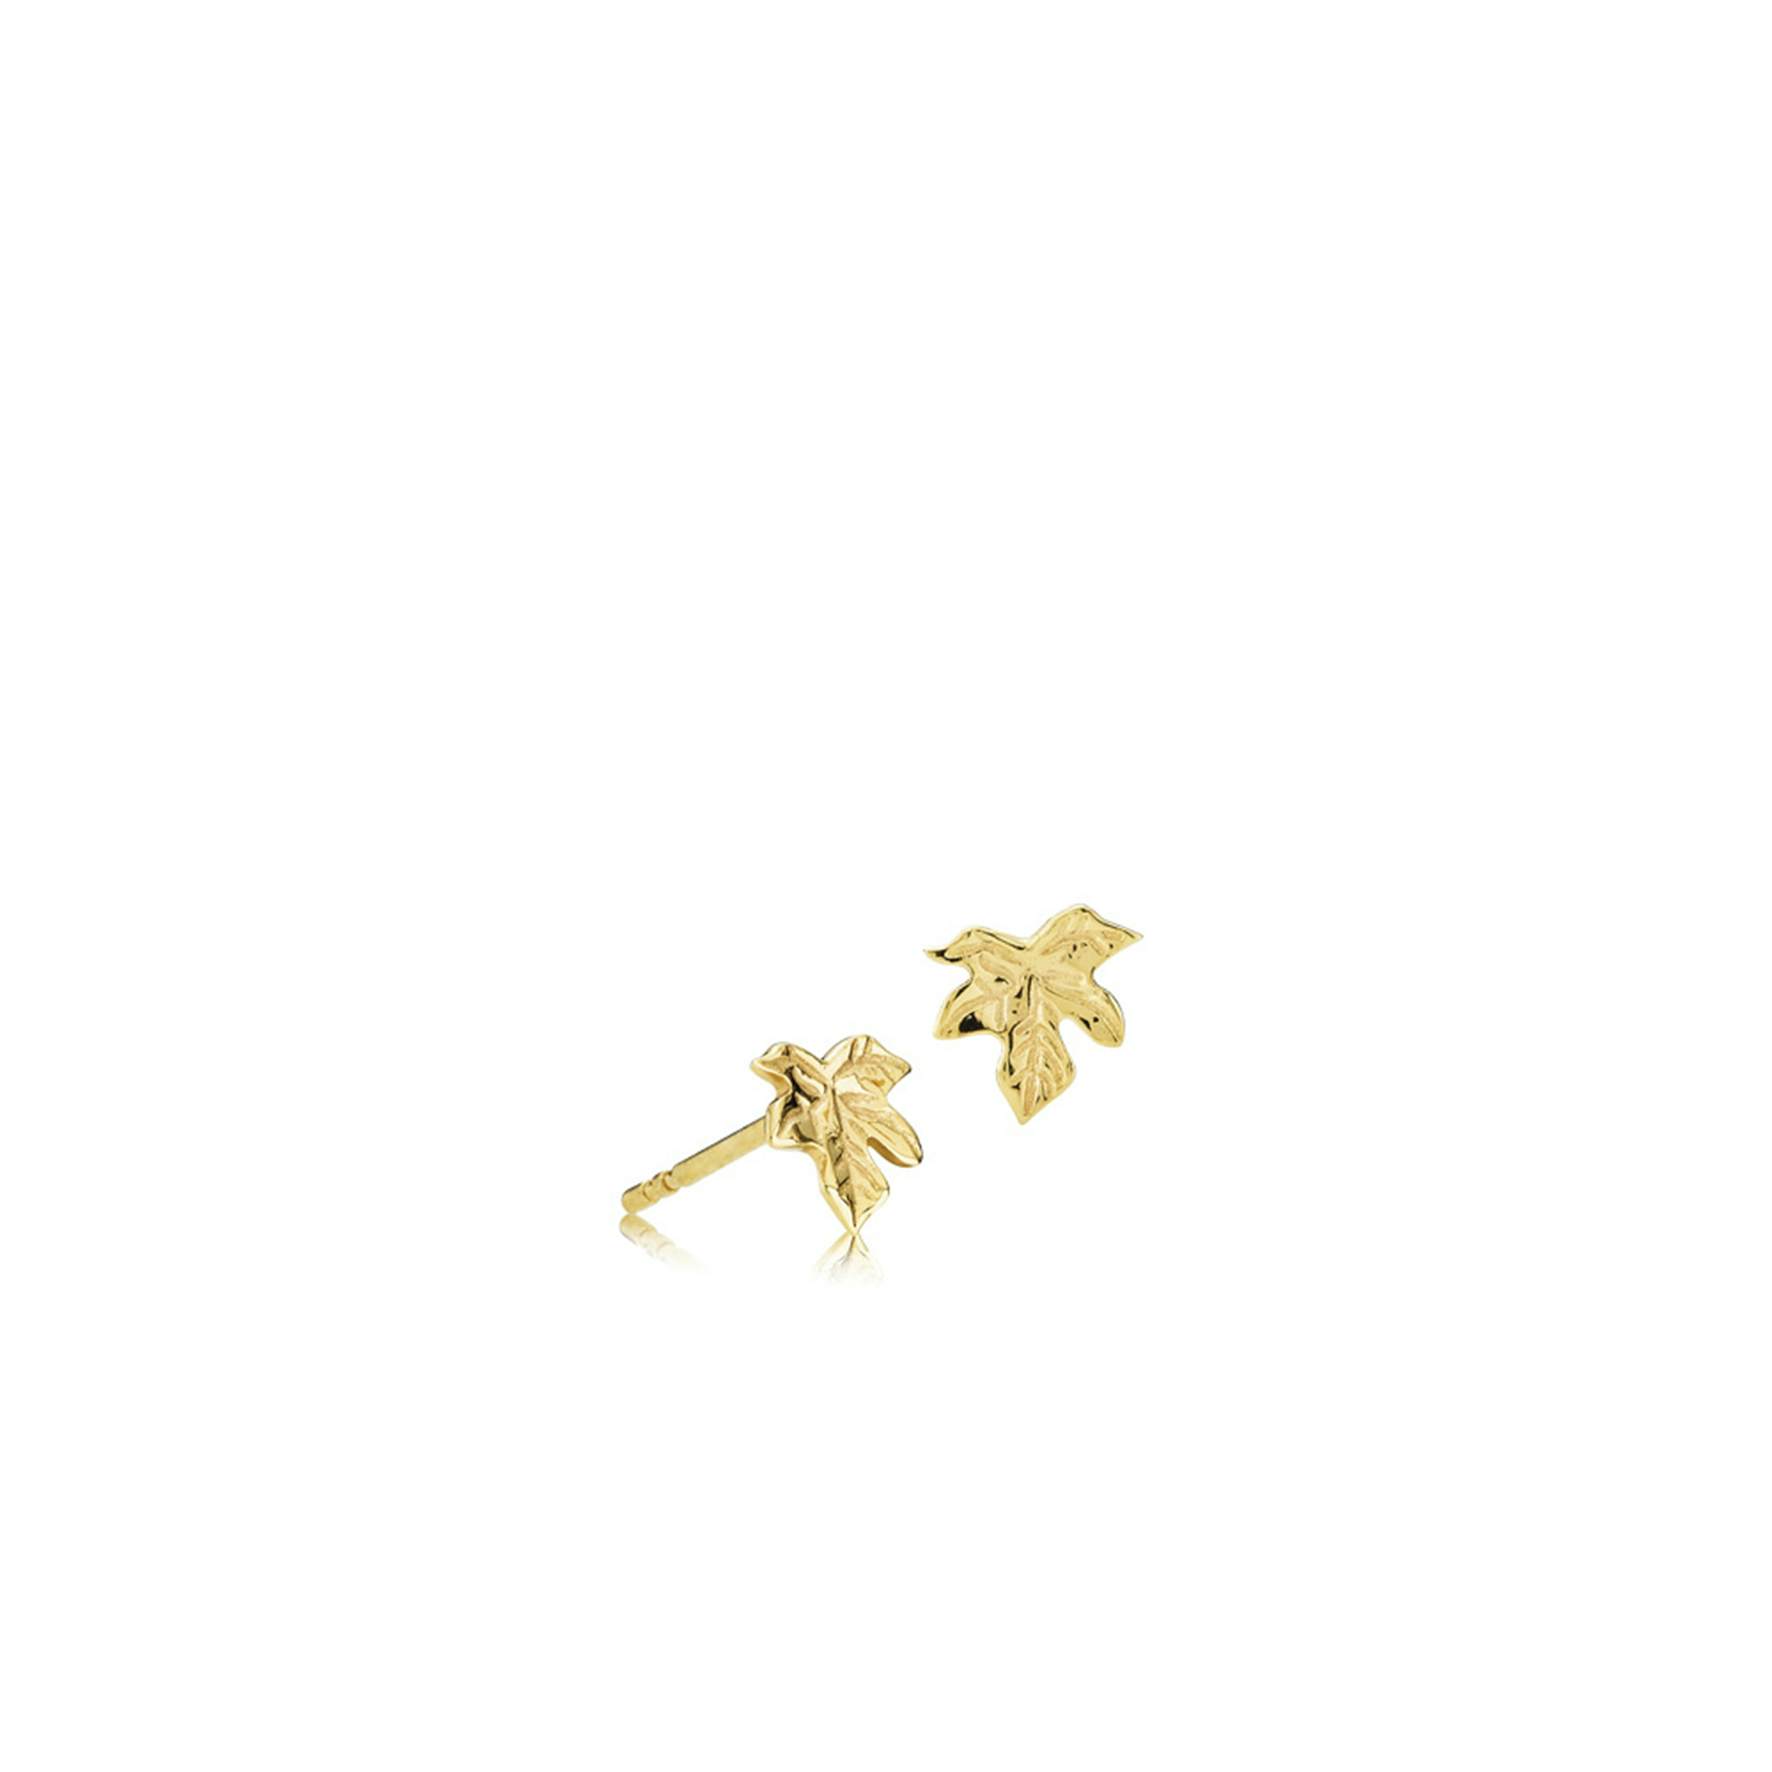 Caley Earsticks from Izabel Camille in Goldplated-Silver Sterling 925